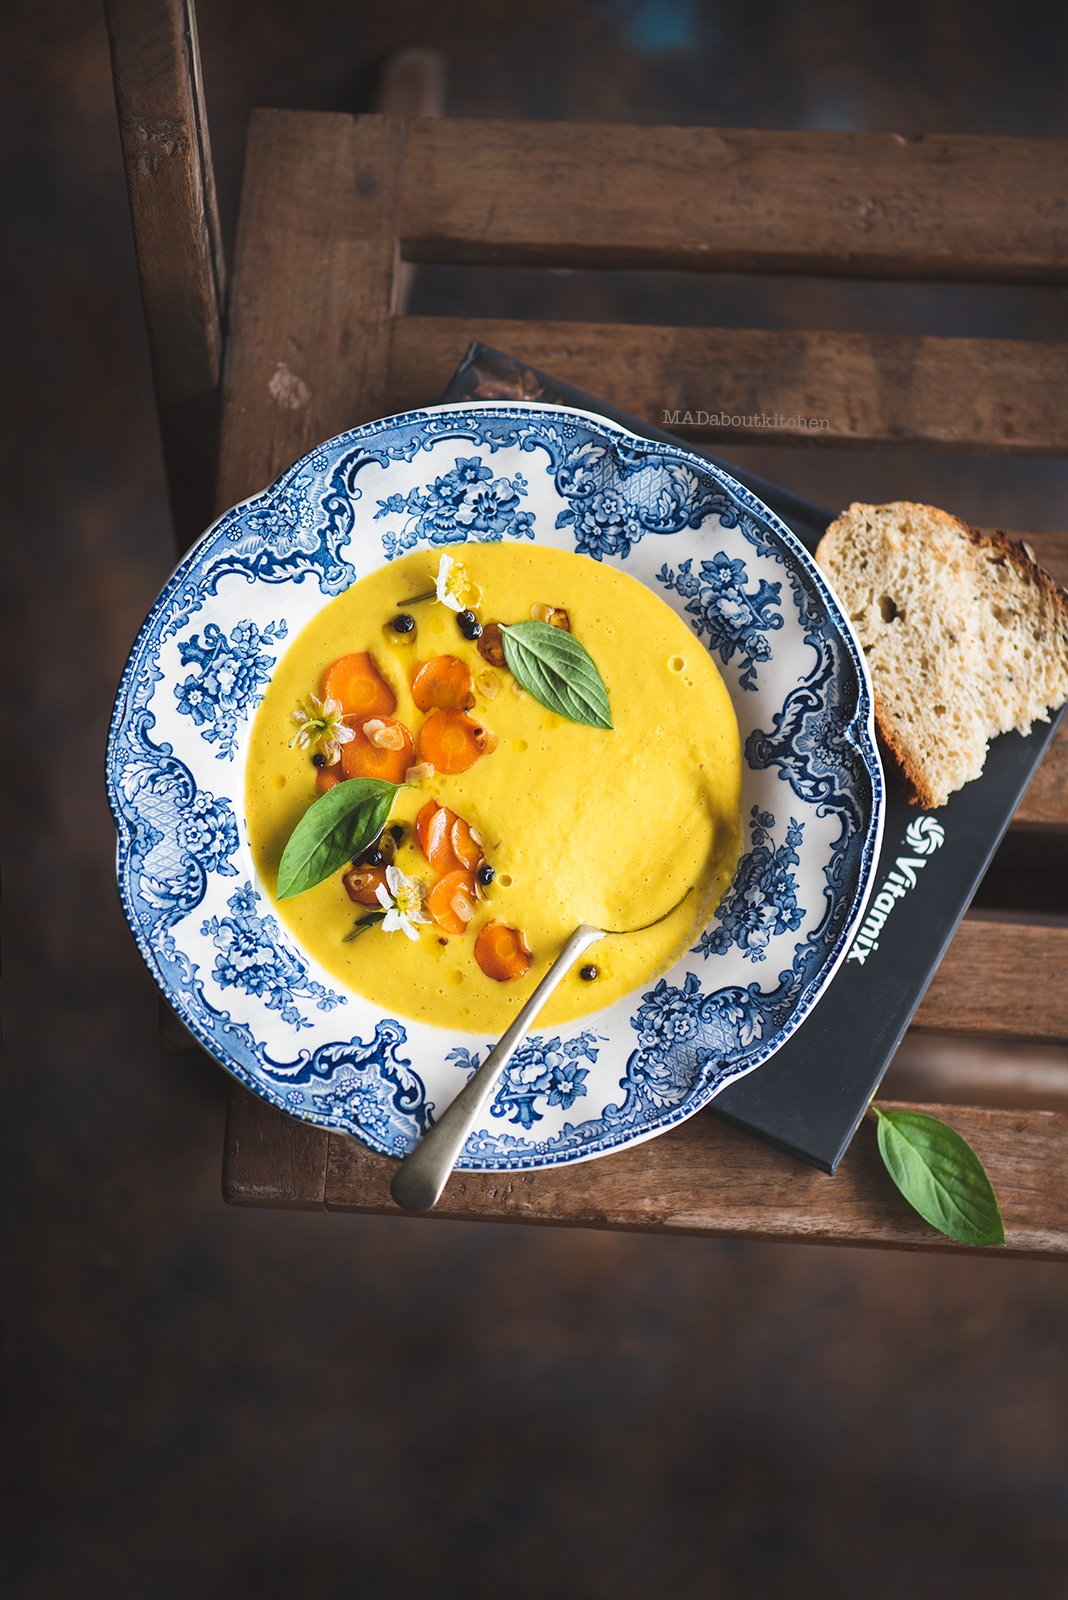 Carrot Corn Soup is a perfect winter soup. Carrot & Corn gives a beautiful colour to the soup. It is creamy, light & filling when had with a slice of bread.